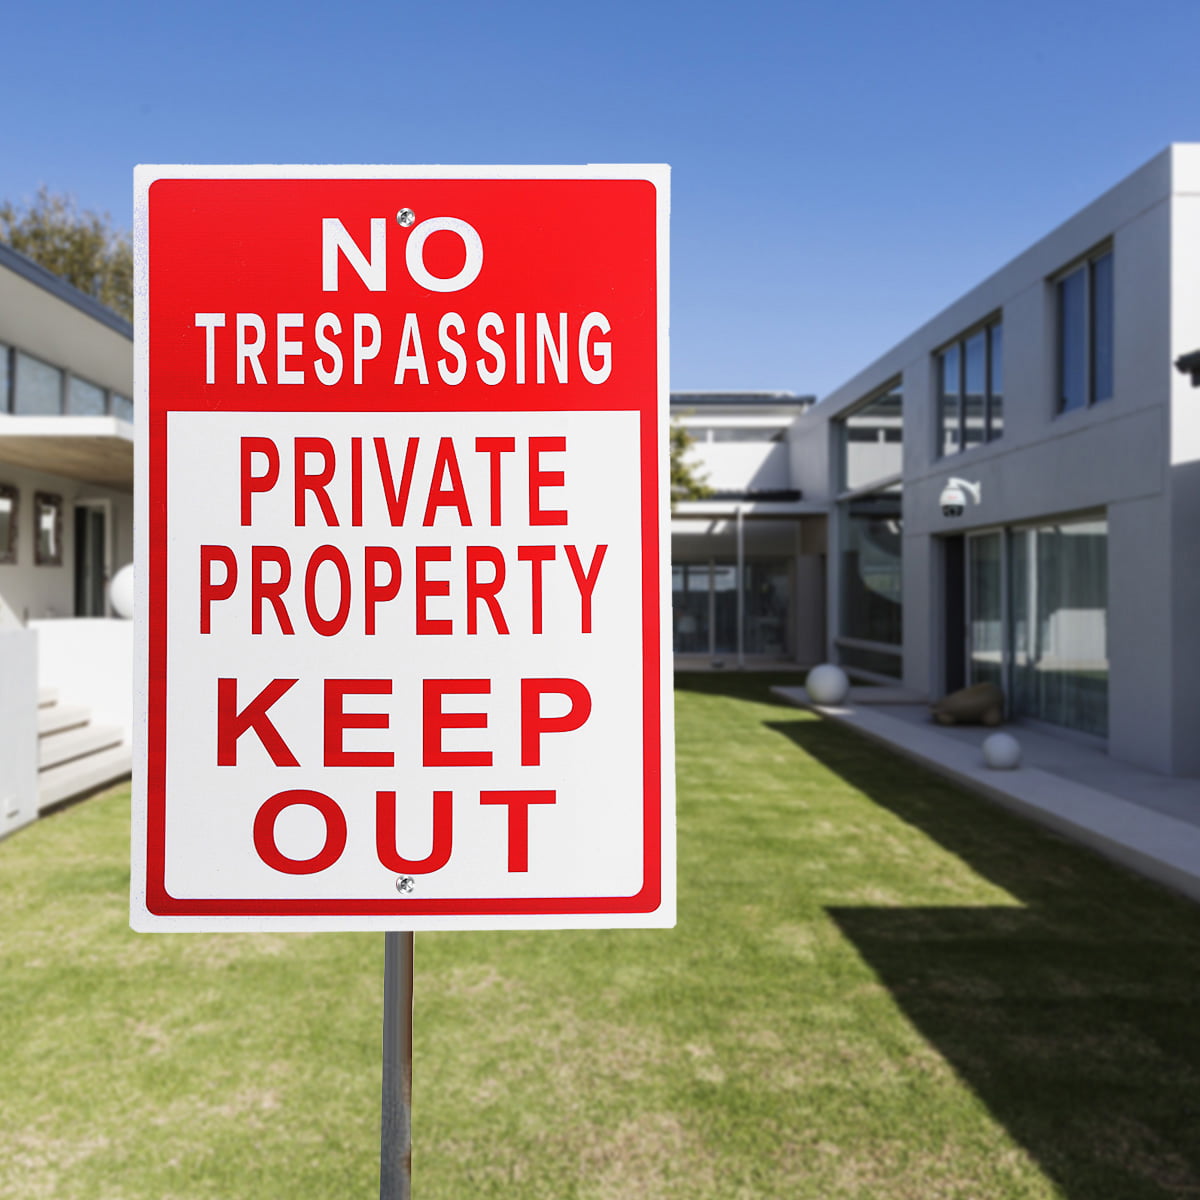 8"x12" Metal No Trespassing Private Property Keep Out Do